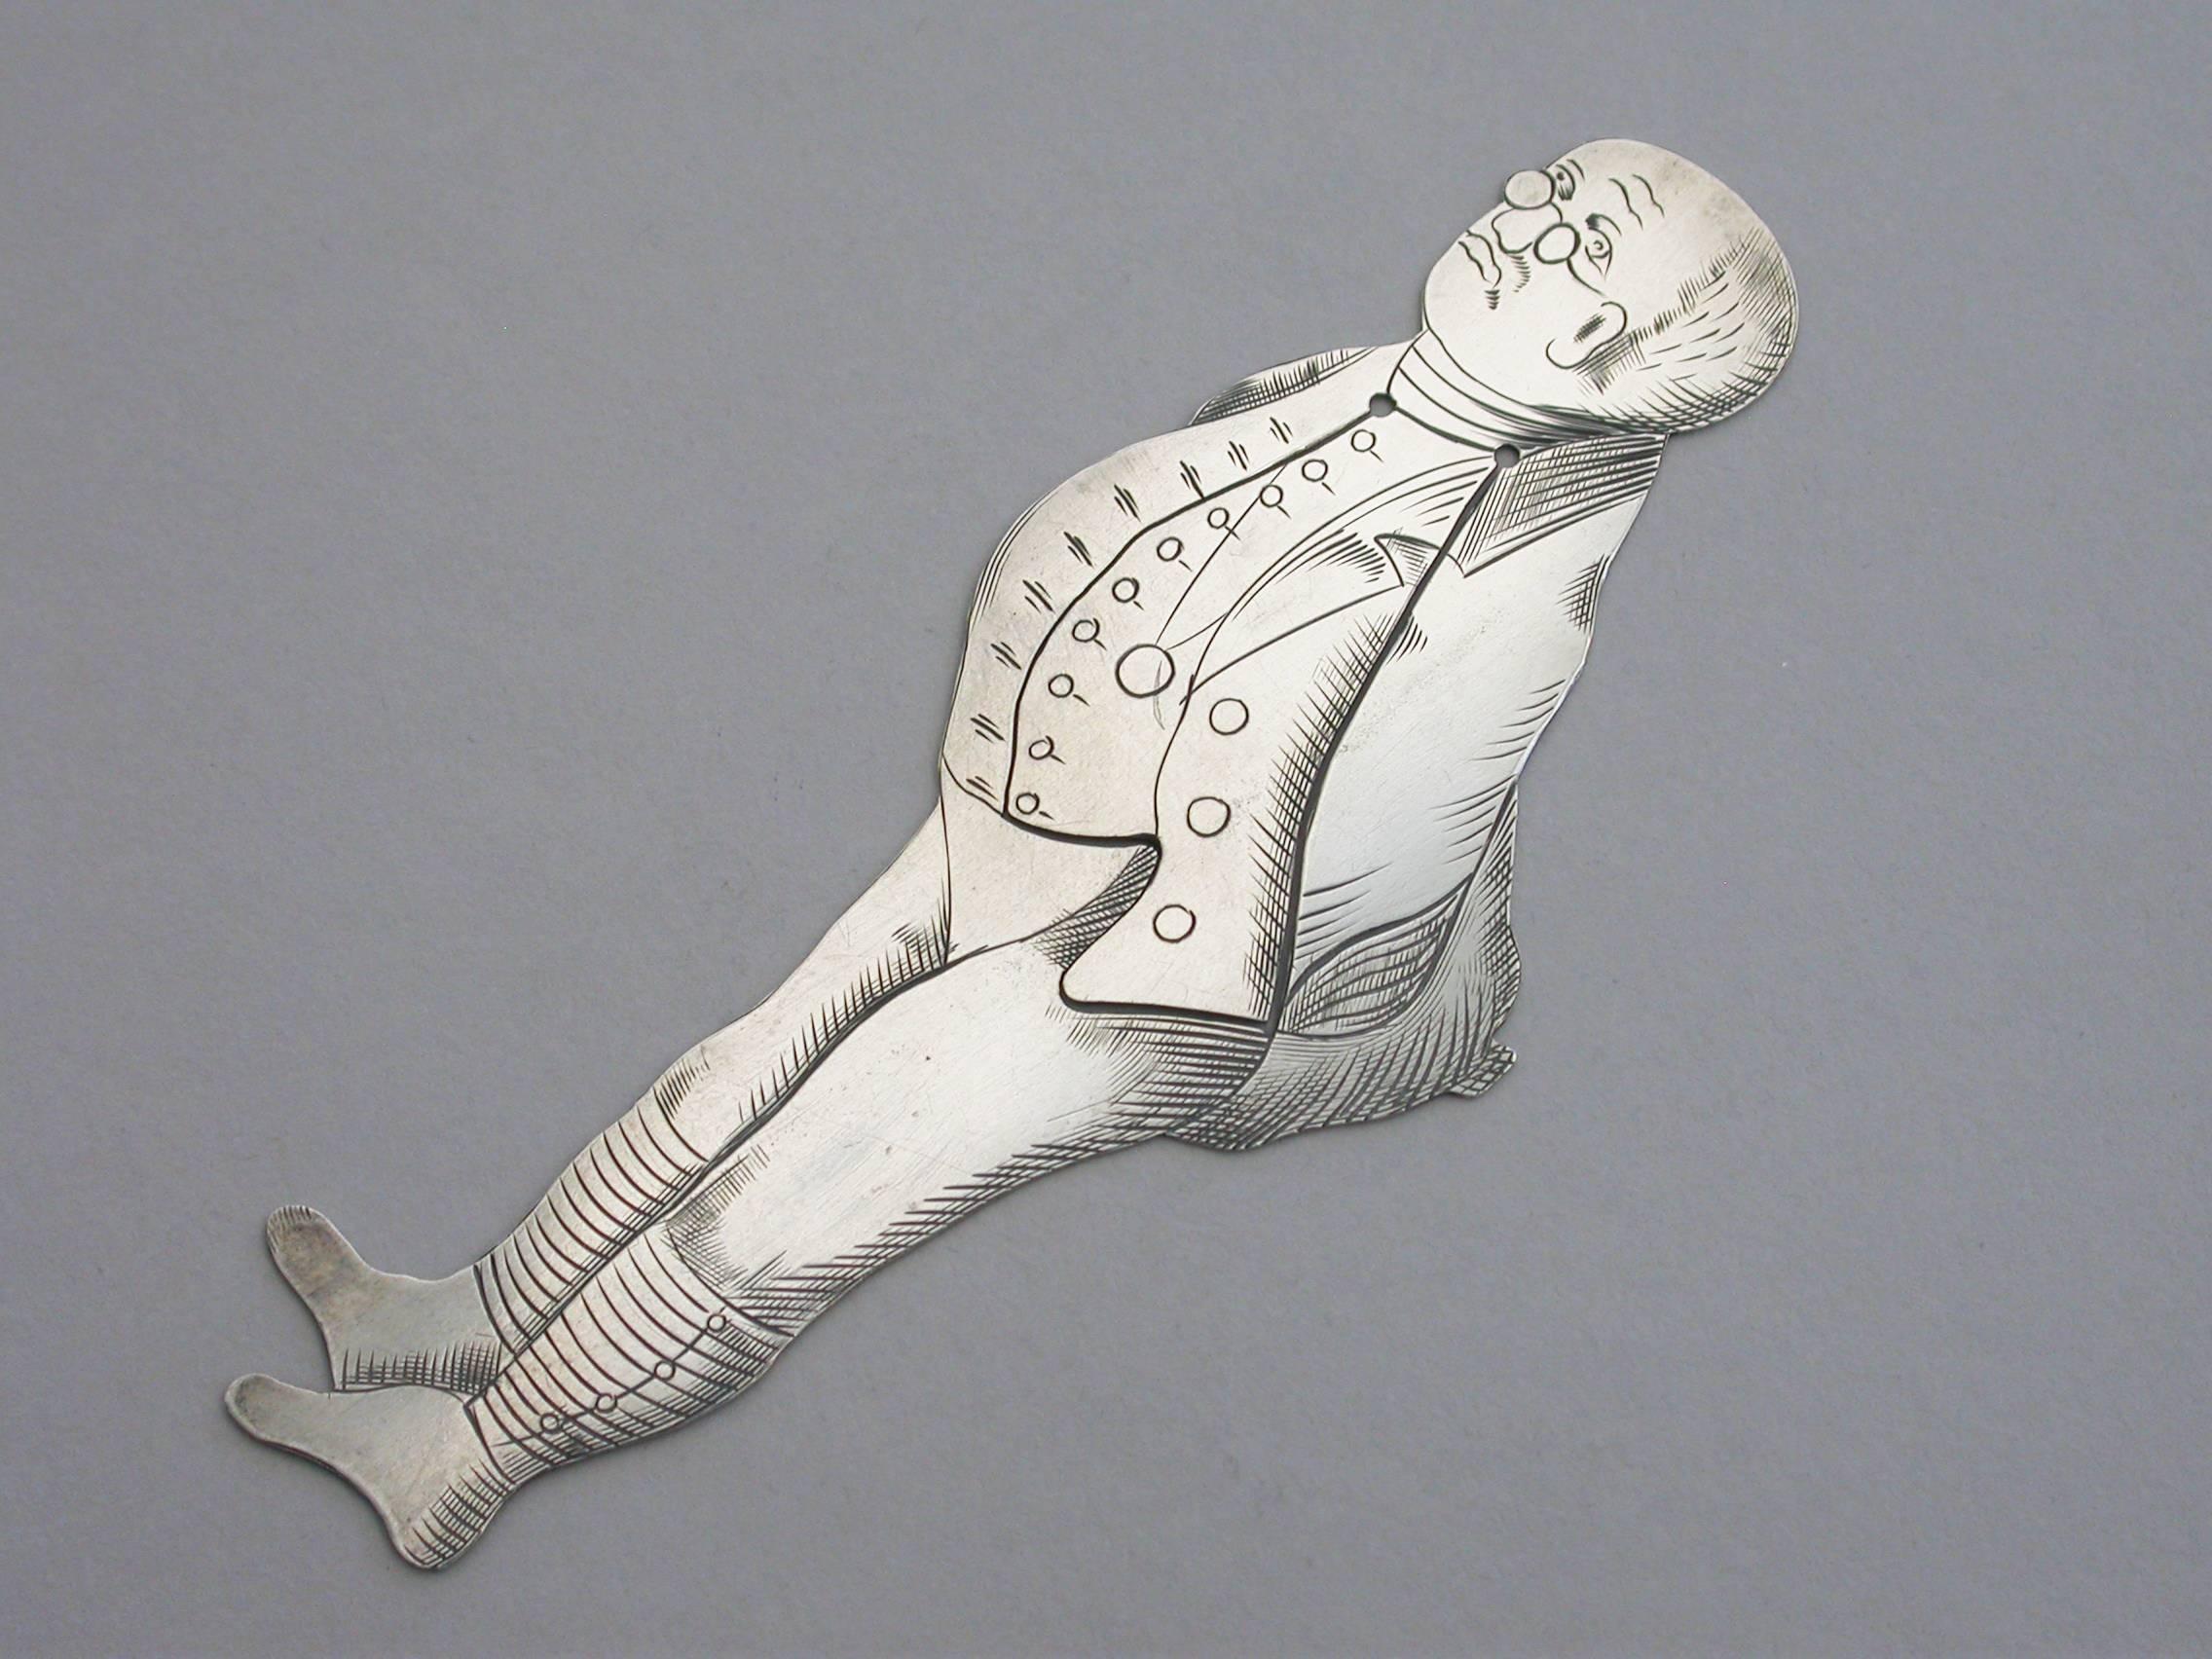 A rare early 20th century American novelty silver figural bookmark, depicting the character Mr Pickwick, from the Charles Dickens novel, The Pickwick Papers.

By J.F. Fradley, New York, circa 1901-1910

In good condition with no damage or